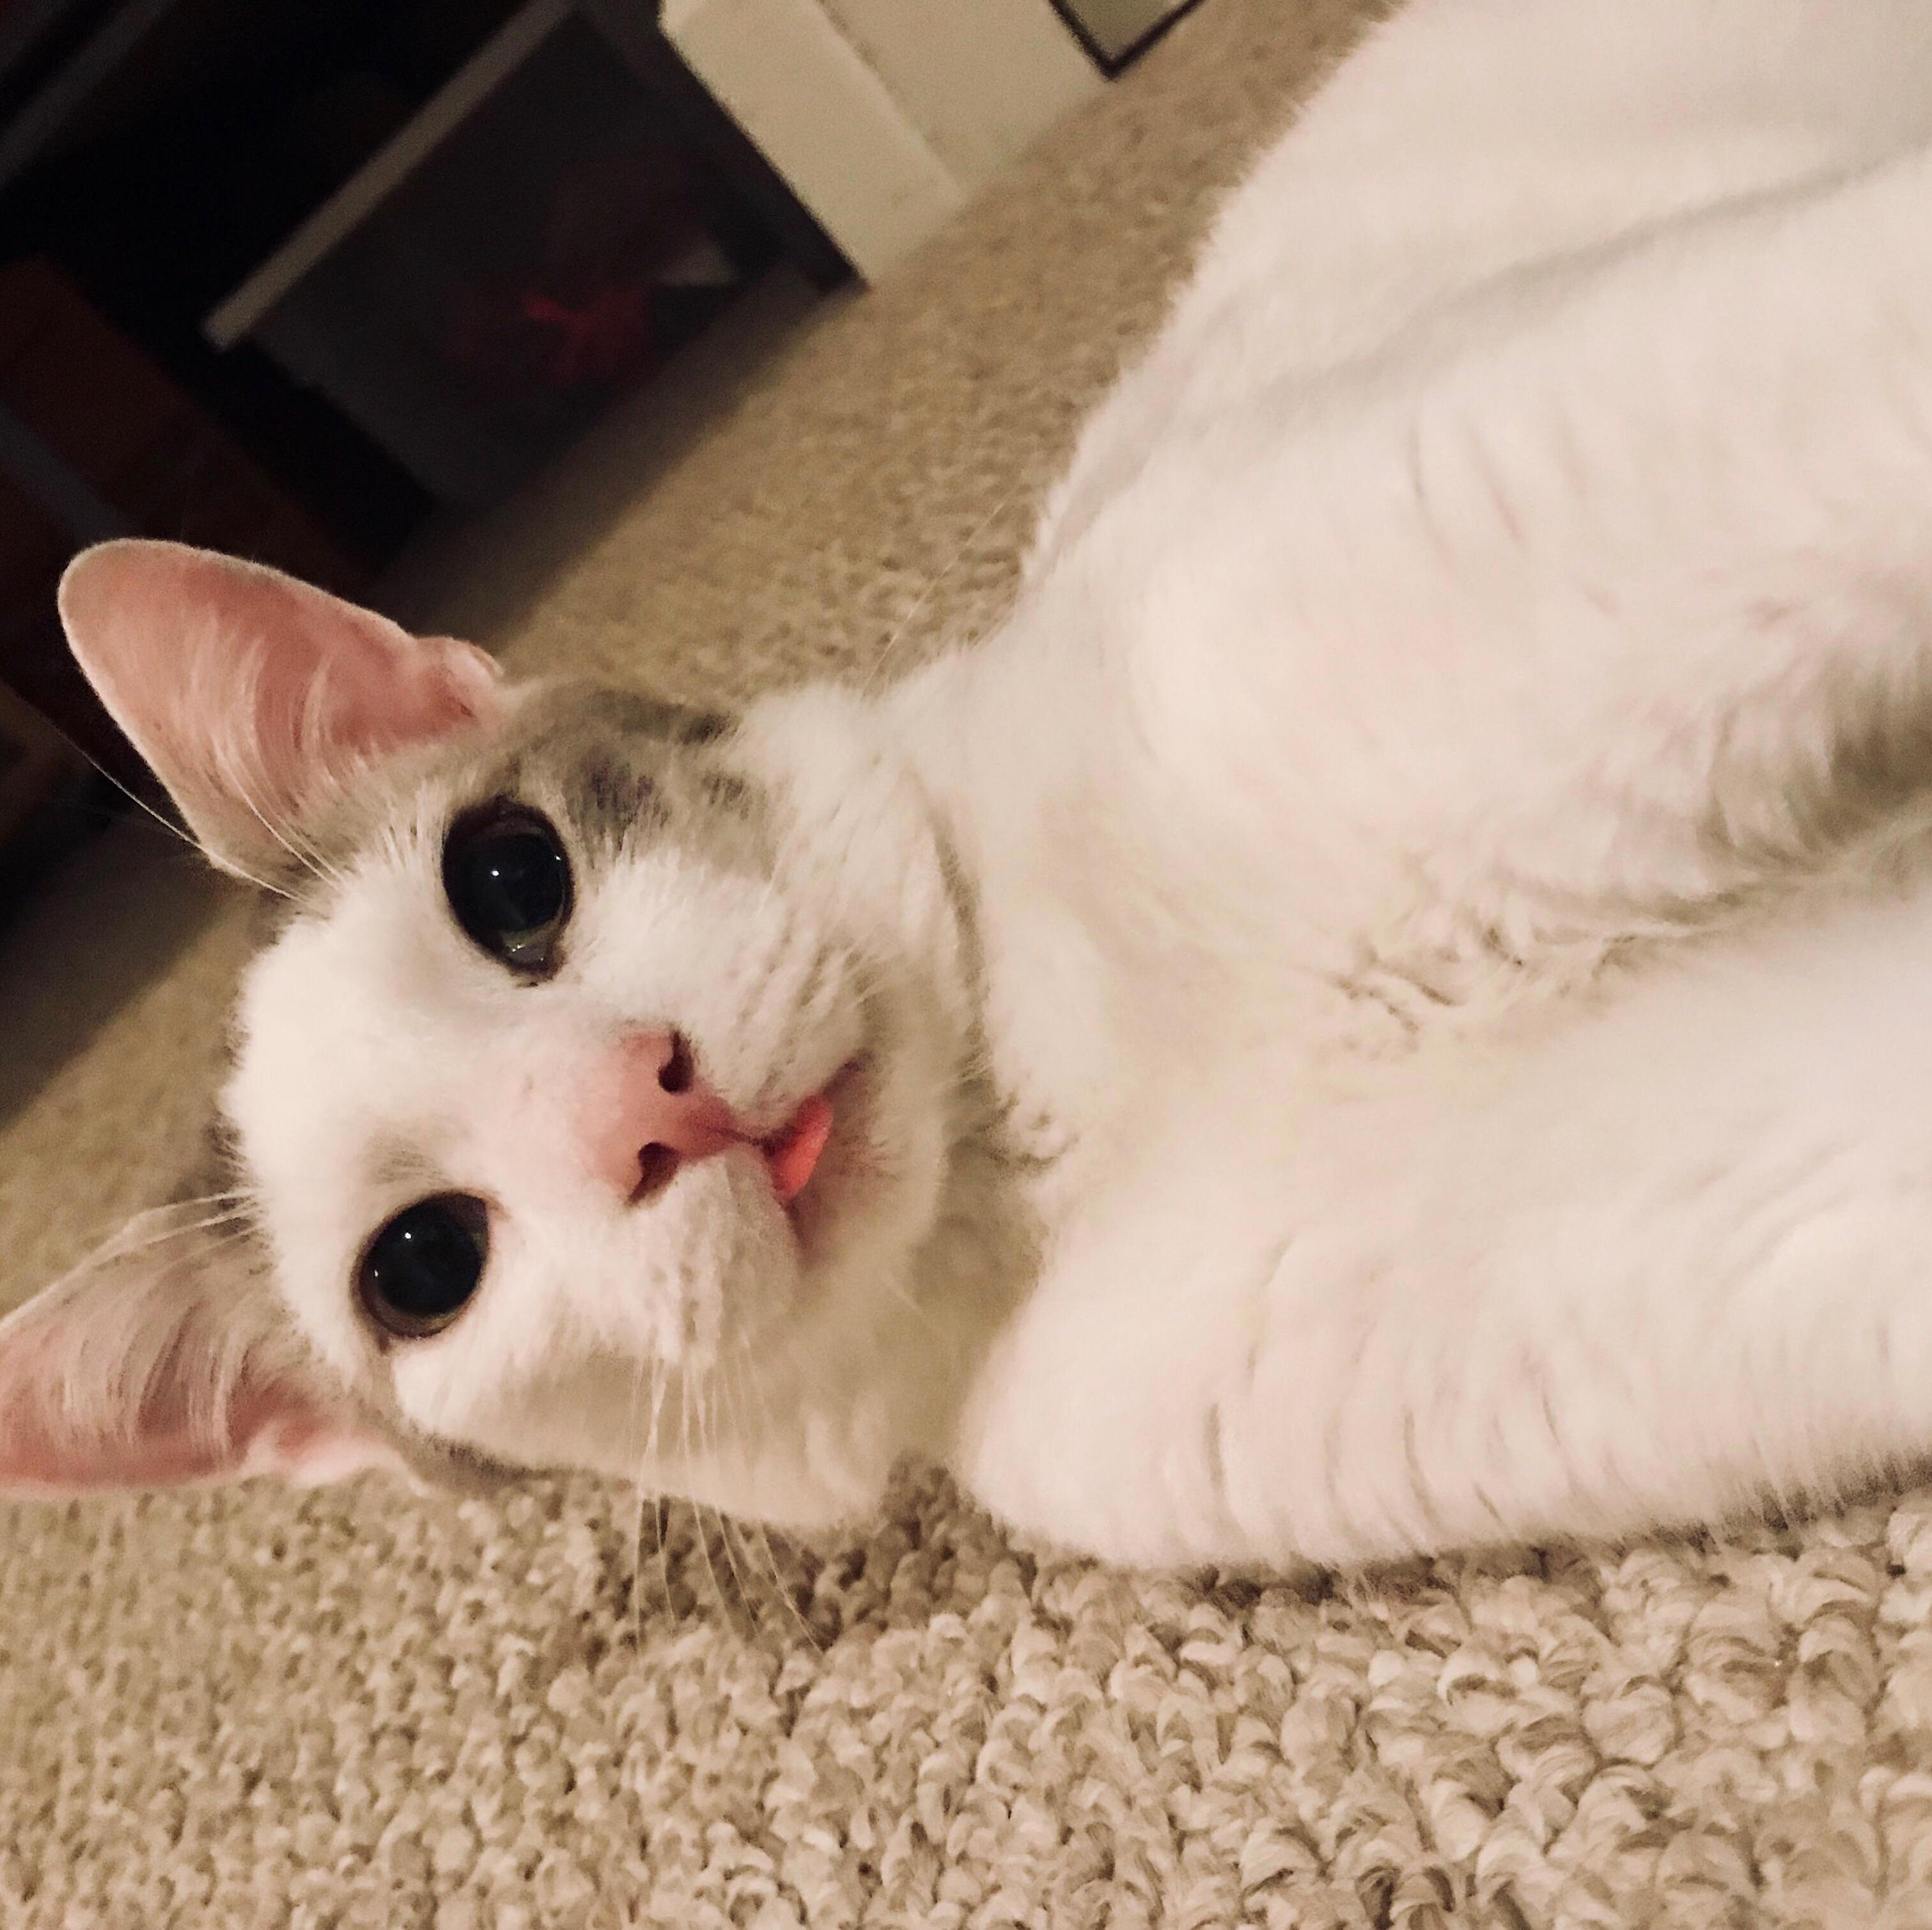 For adopt a cat month brought home this guy, meet snow!